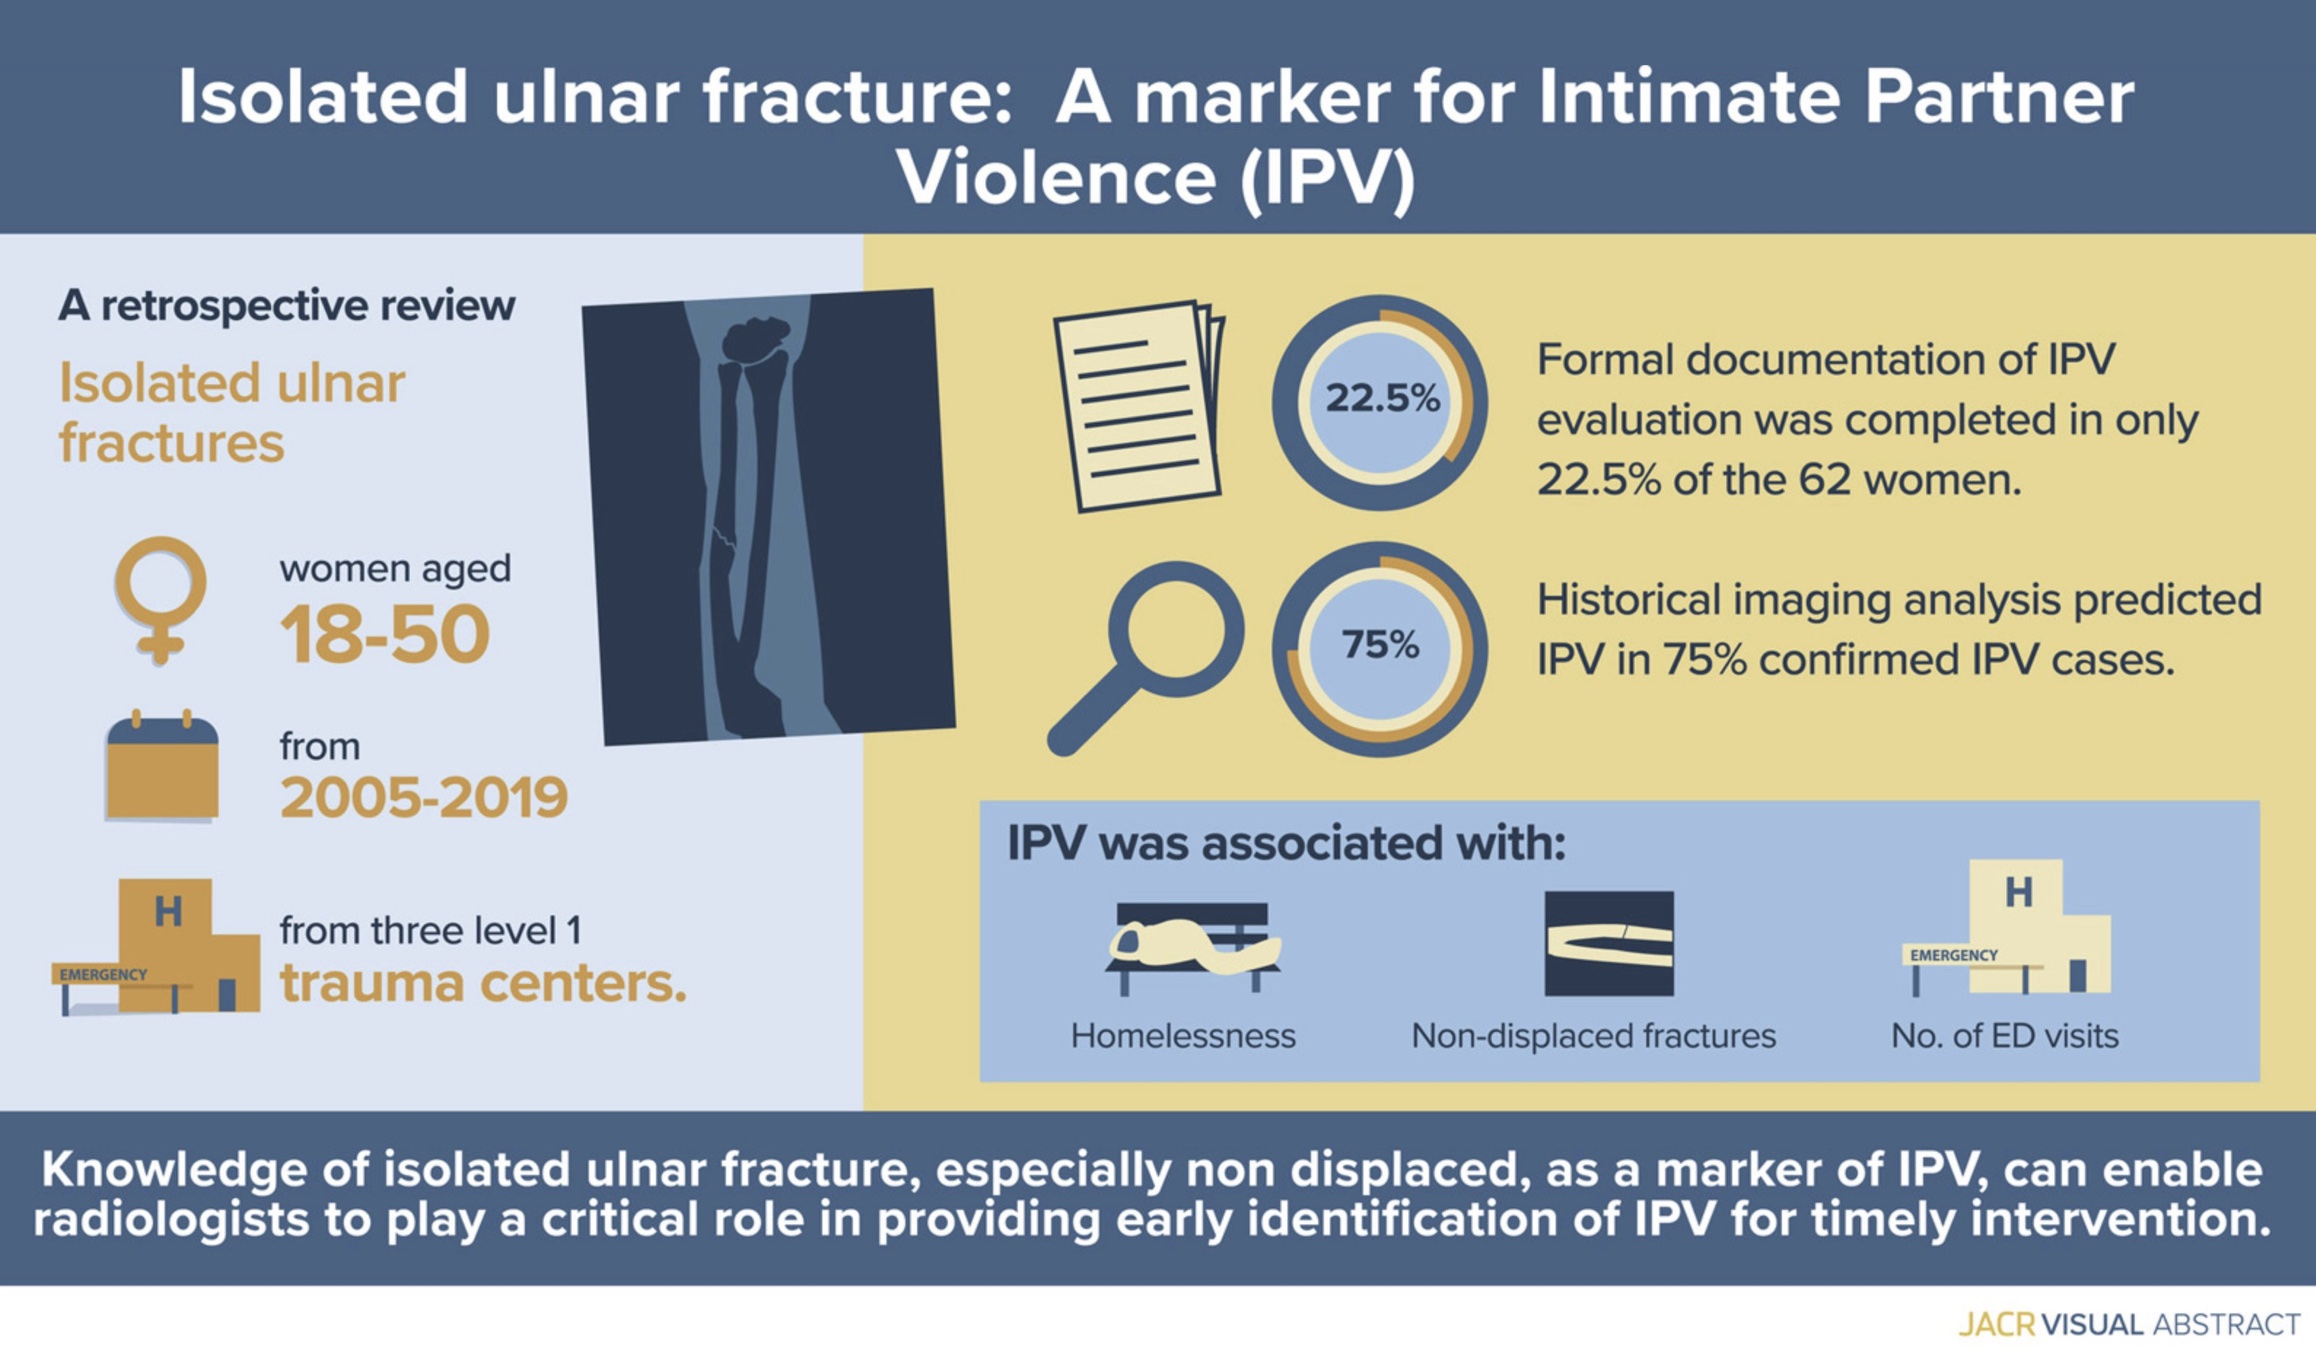 Recognizing Isolated Ulnar Fractures as Potential Markers for Intimate Partner Violence